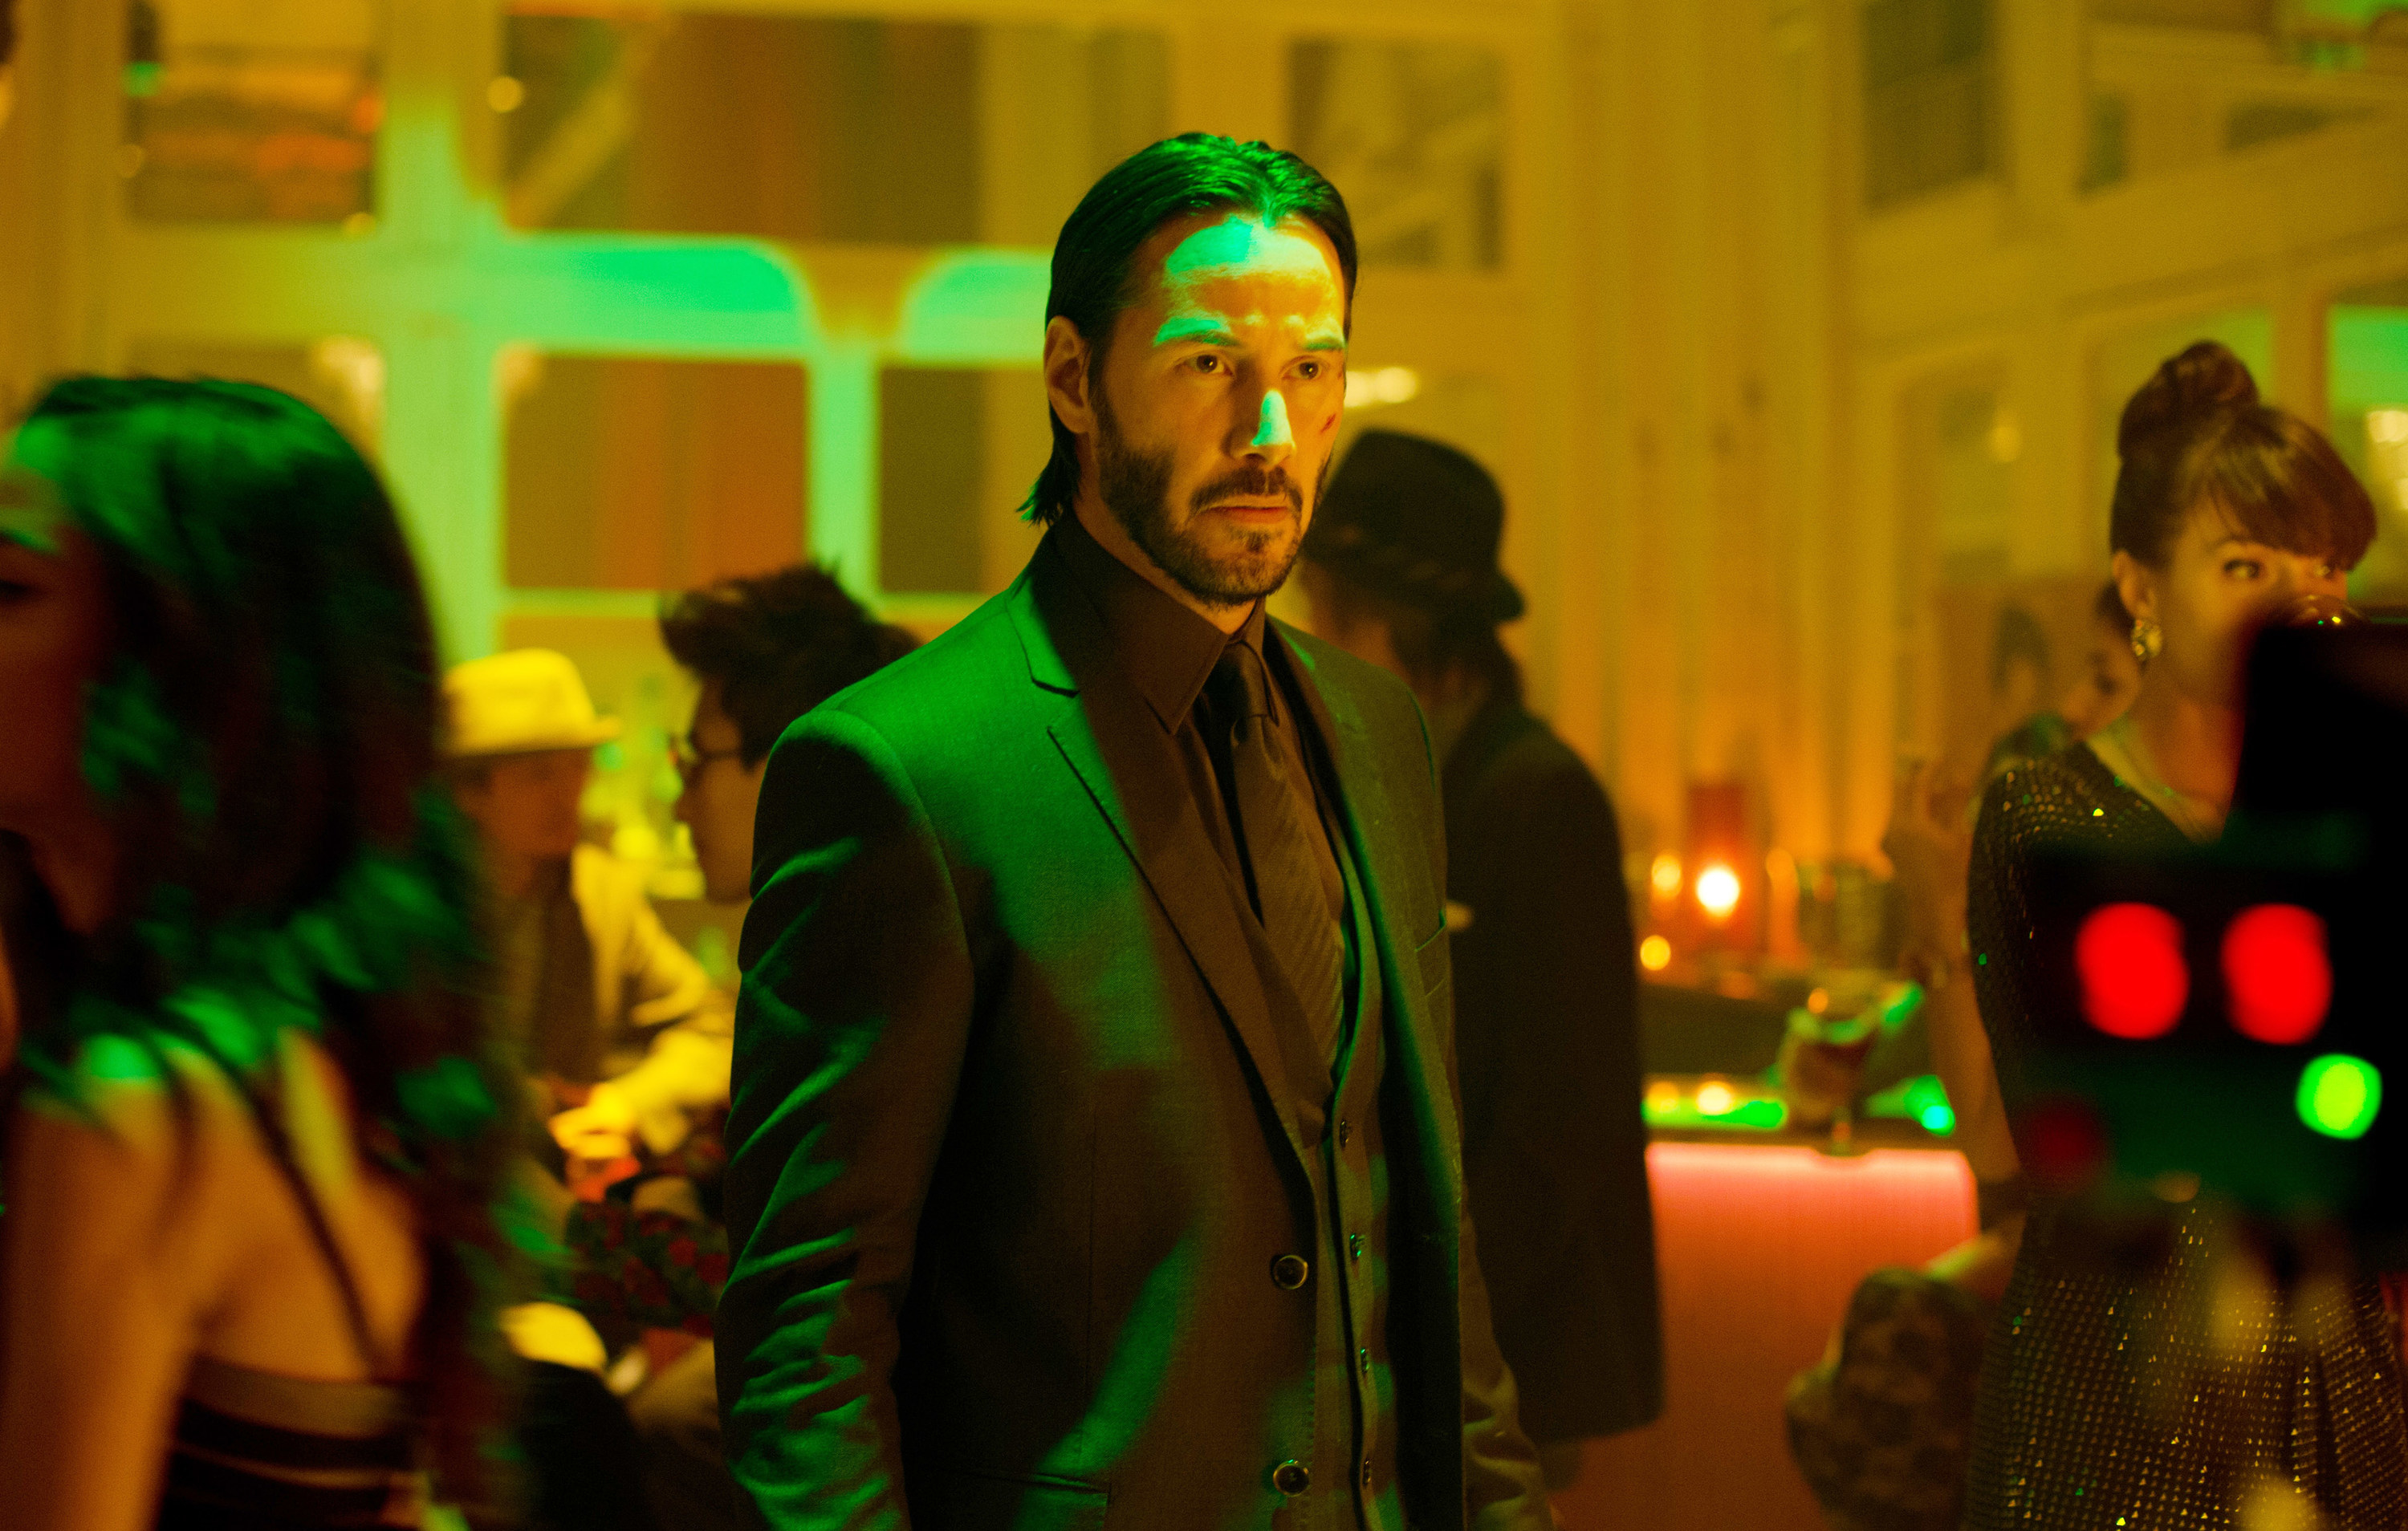 John Wick in a suit in the middle of a party